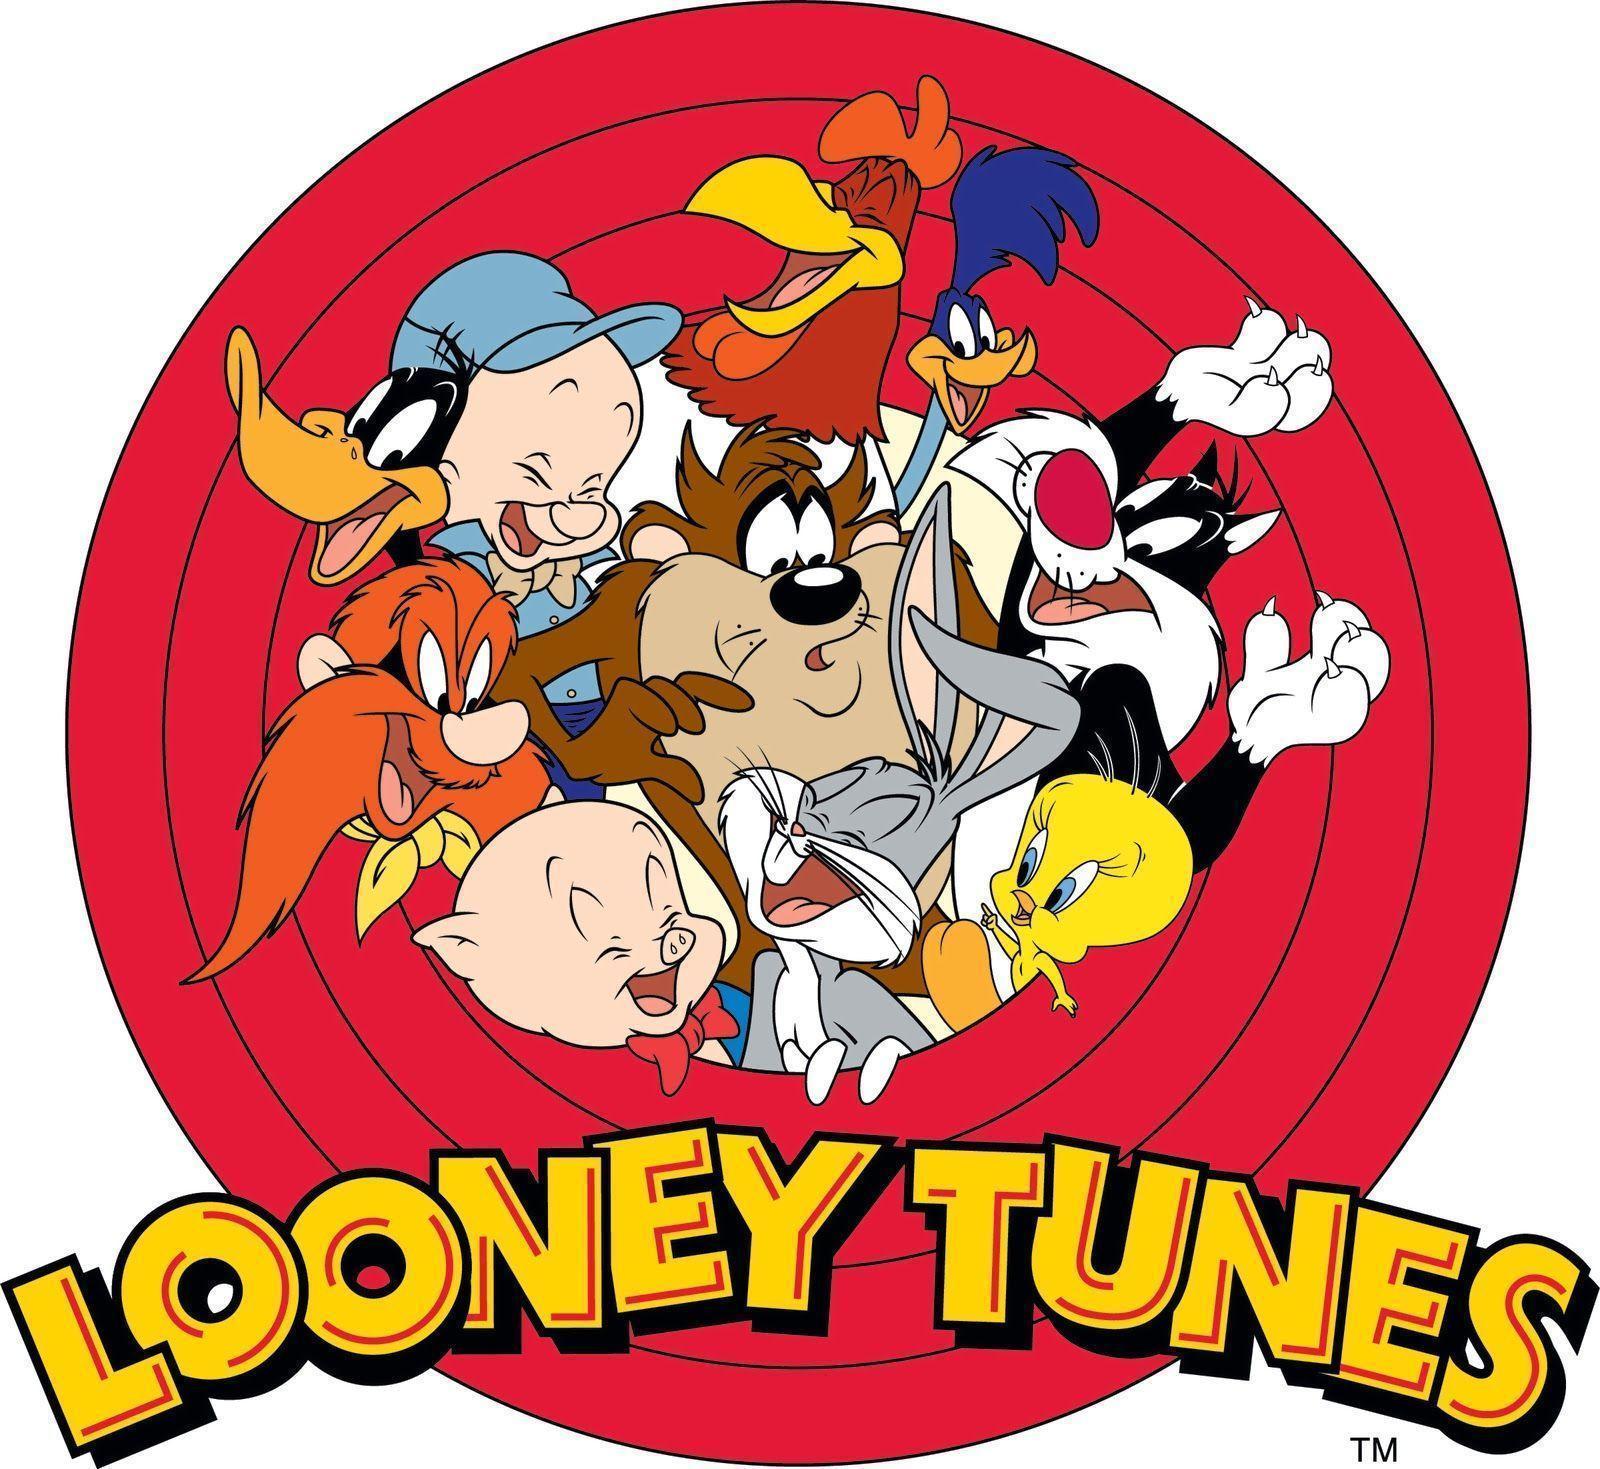 Looney Tunes Backgrounds - Wallpaper Cave